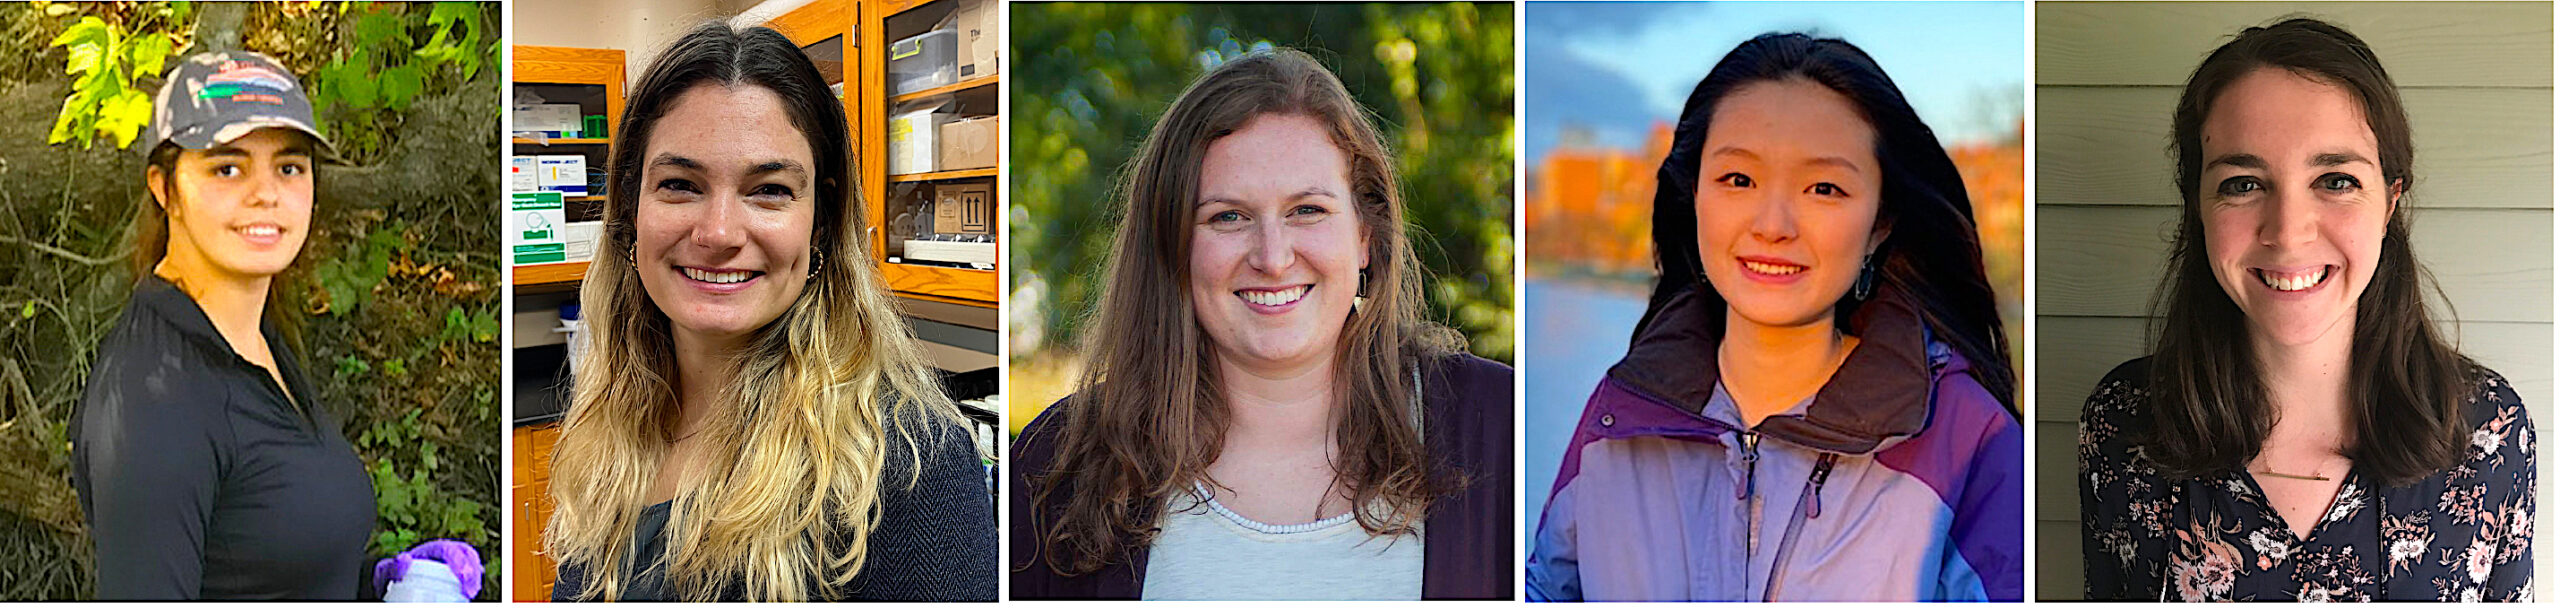 image: From left to right, the new coastal and water resource fellows: Emine Fidan, Tiffany VanDerwerker, Lauren Grimley, Georgette Tso, and Holly Haflich.